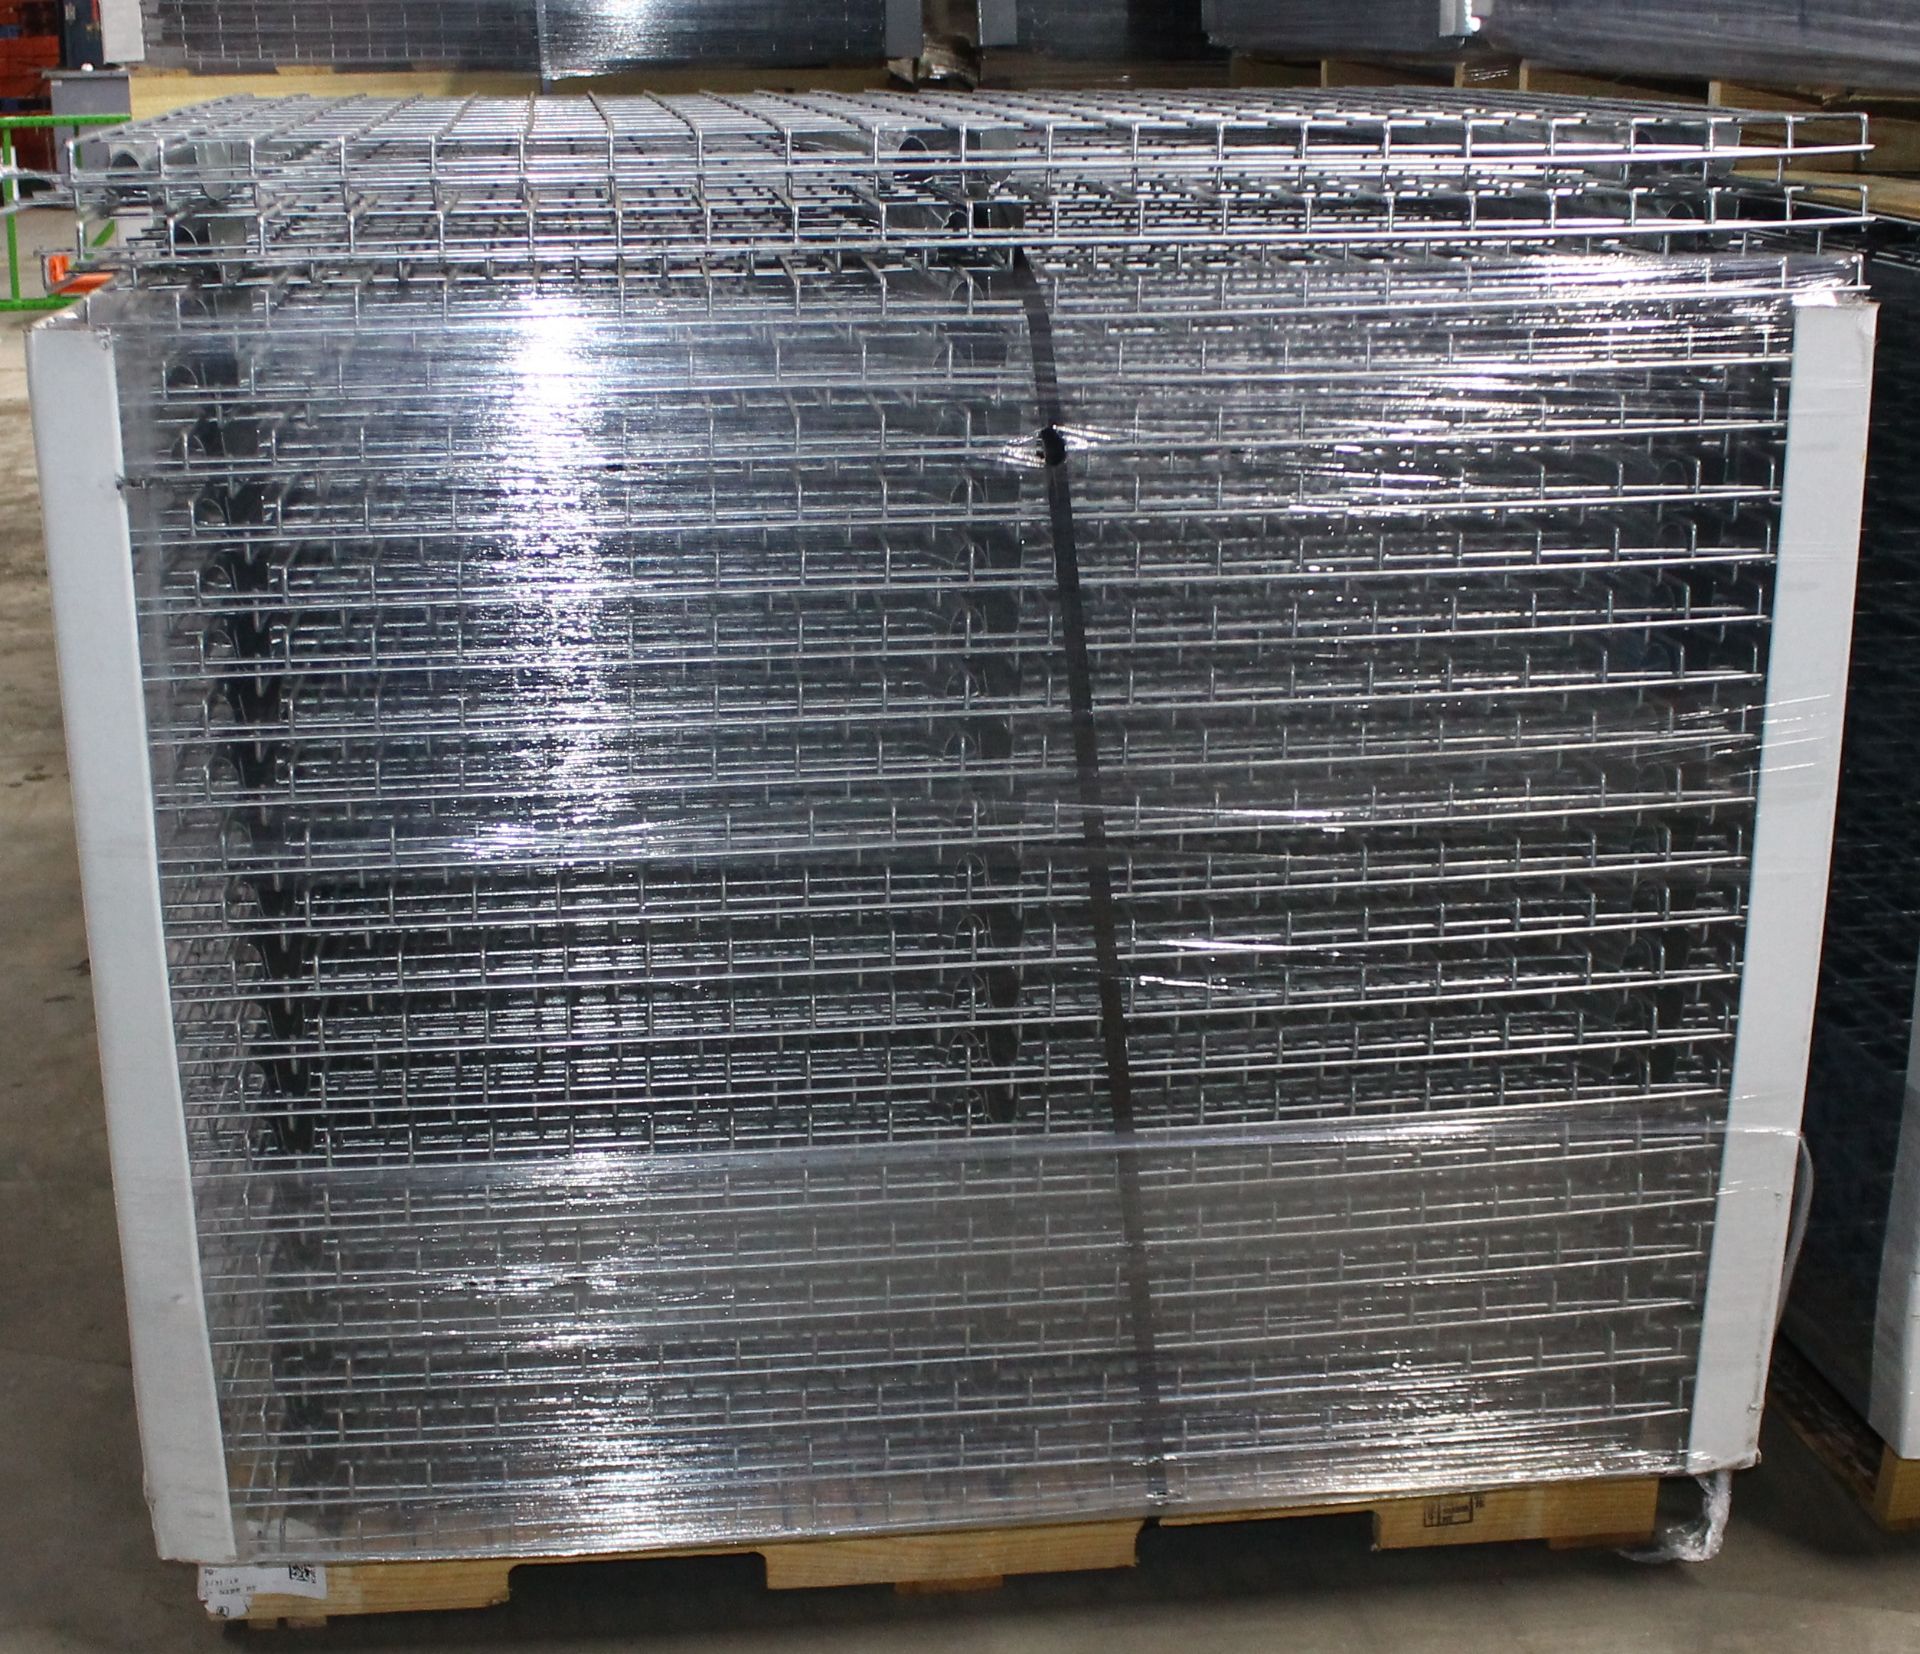 NEW 40 PCS OF STANDARD 48" X 46" WIREDECK - 1900 LBS CAPACITY - Image 2 of 2